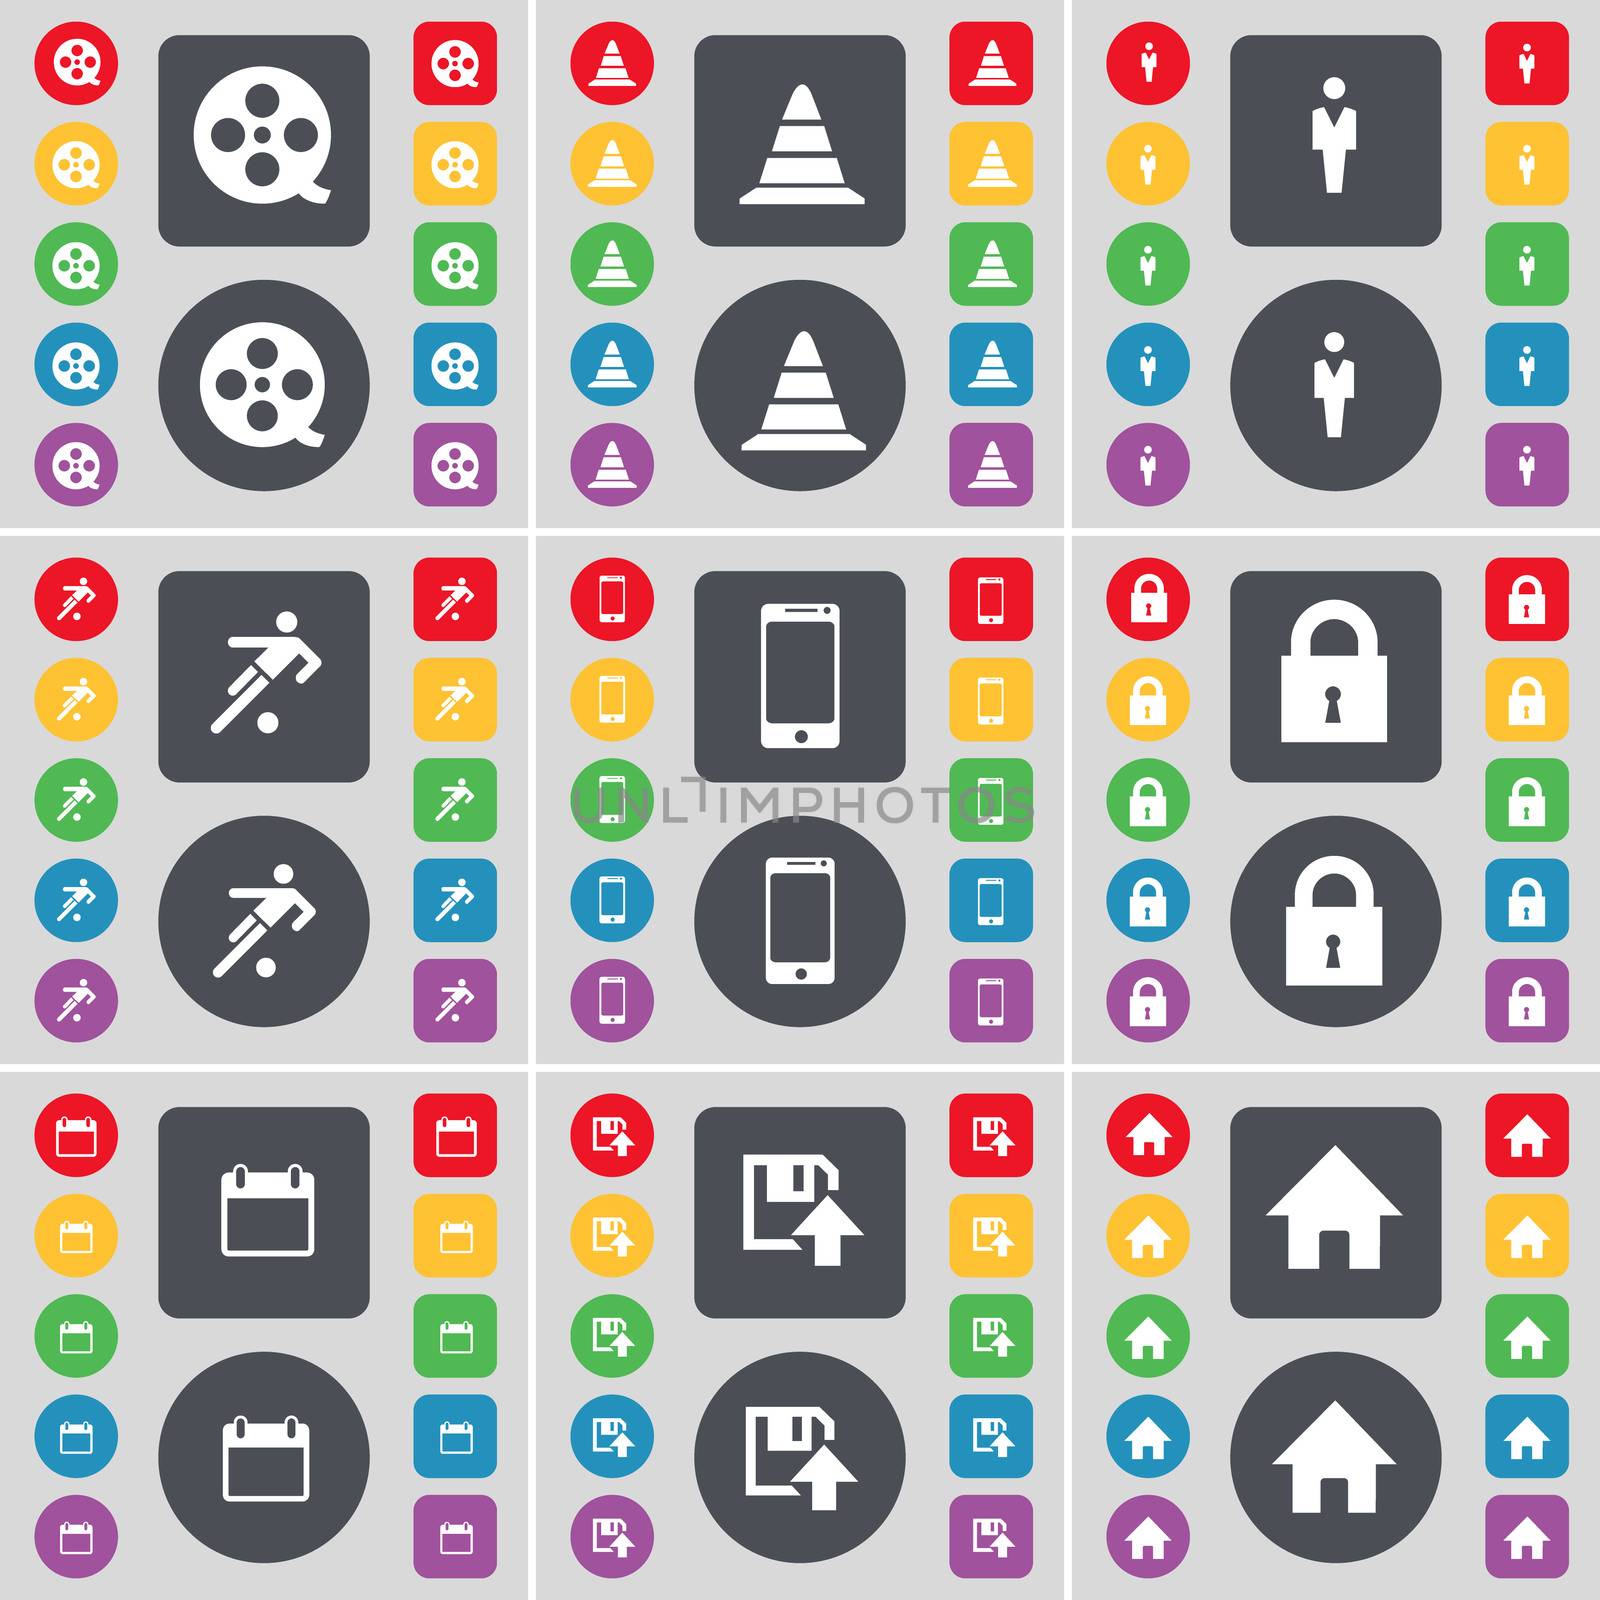 Videotape, Cone, Silhouette, Football, Smartphone, Lock, Calendar, Floppy, House icon symbol. A large set of flat, colored buttons for your design. illustration